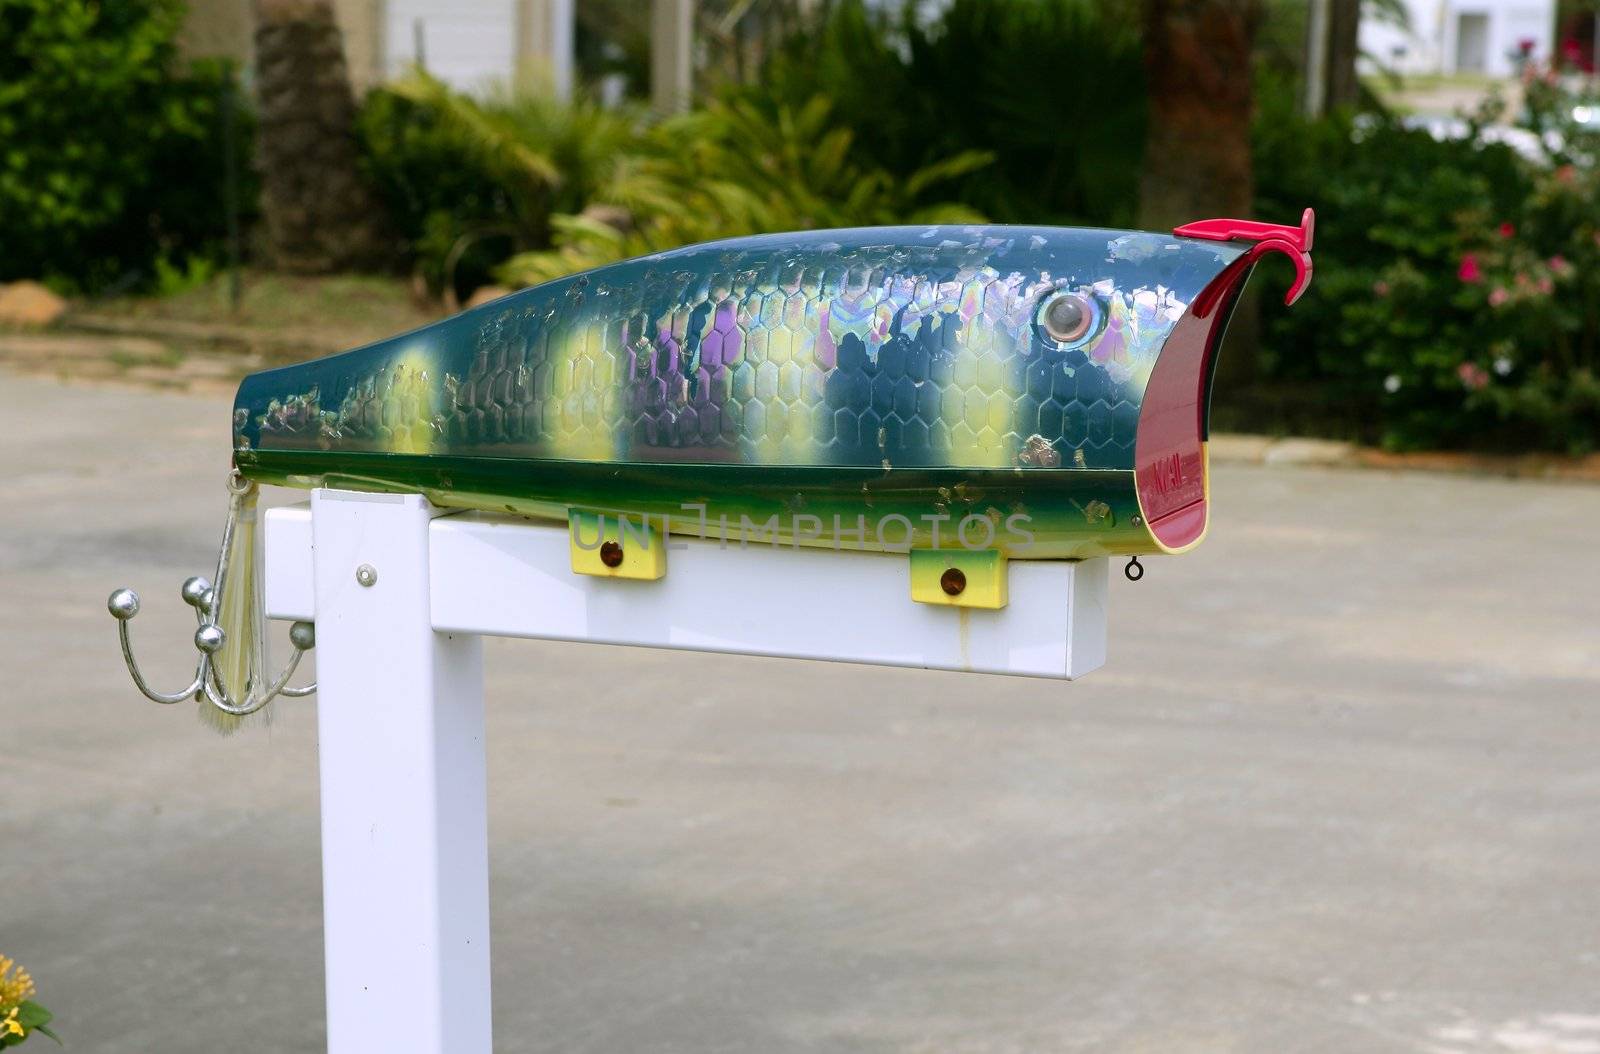 Fun artistic mail box with fish color and shape